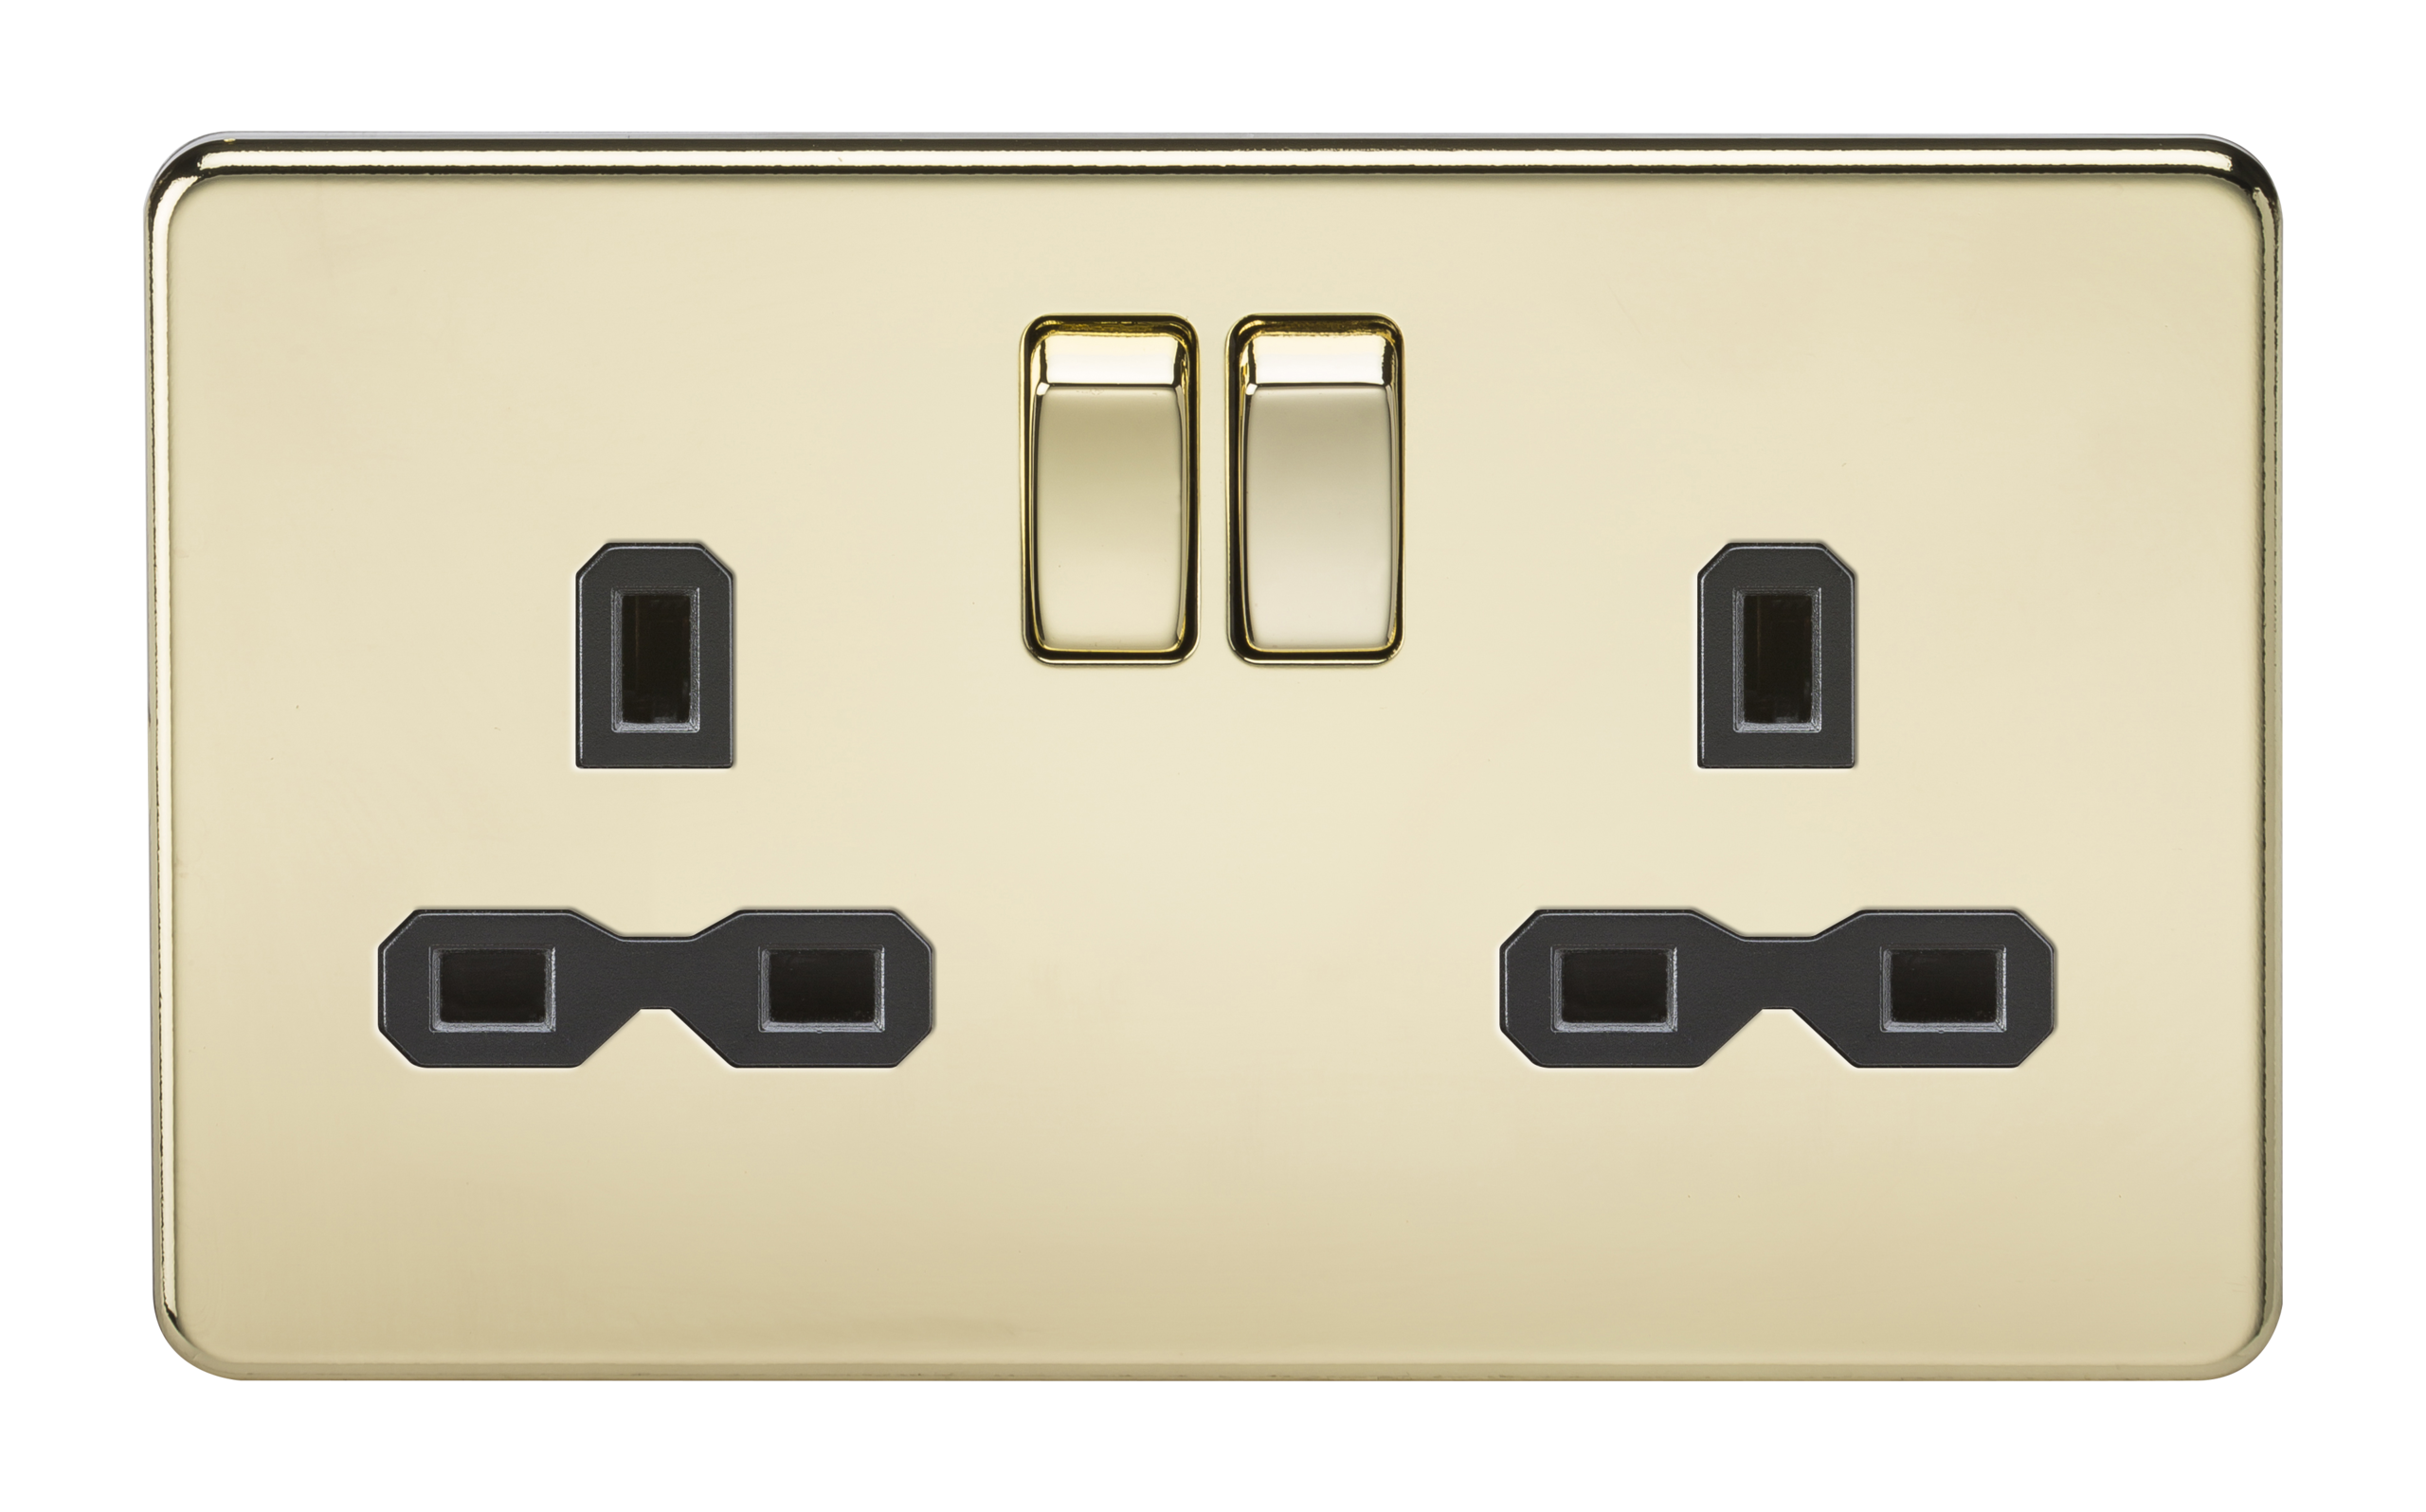 Screwless 13A 2G DP Switched Socket - Polished Brass With Black Insert - SFR9000PB 